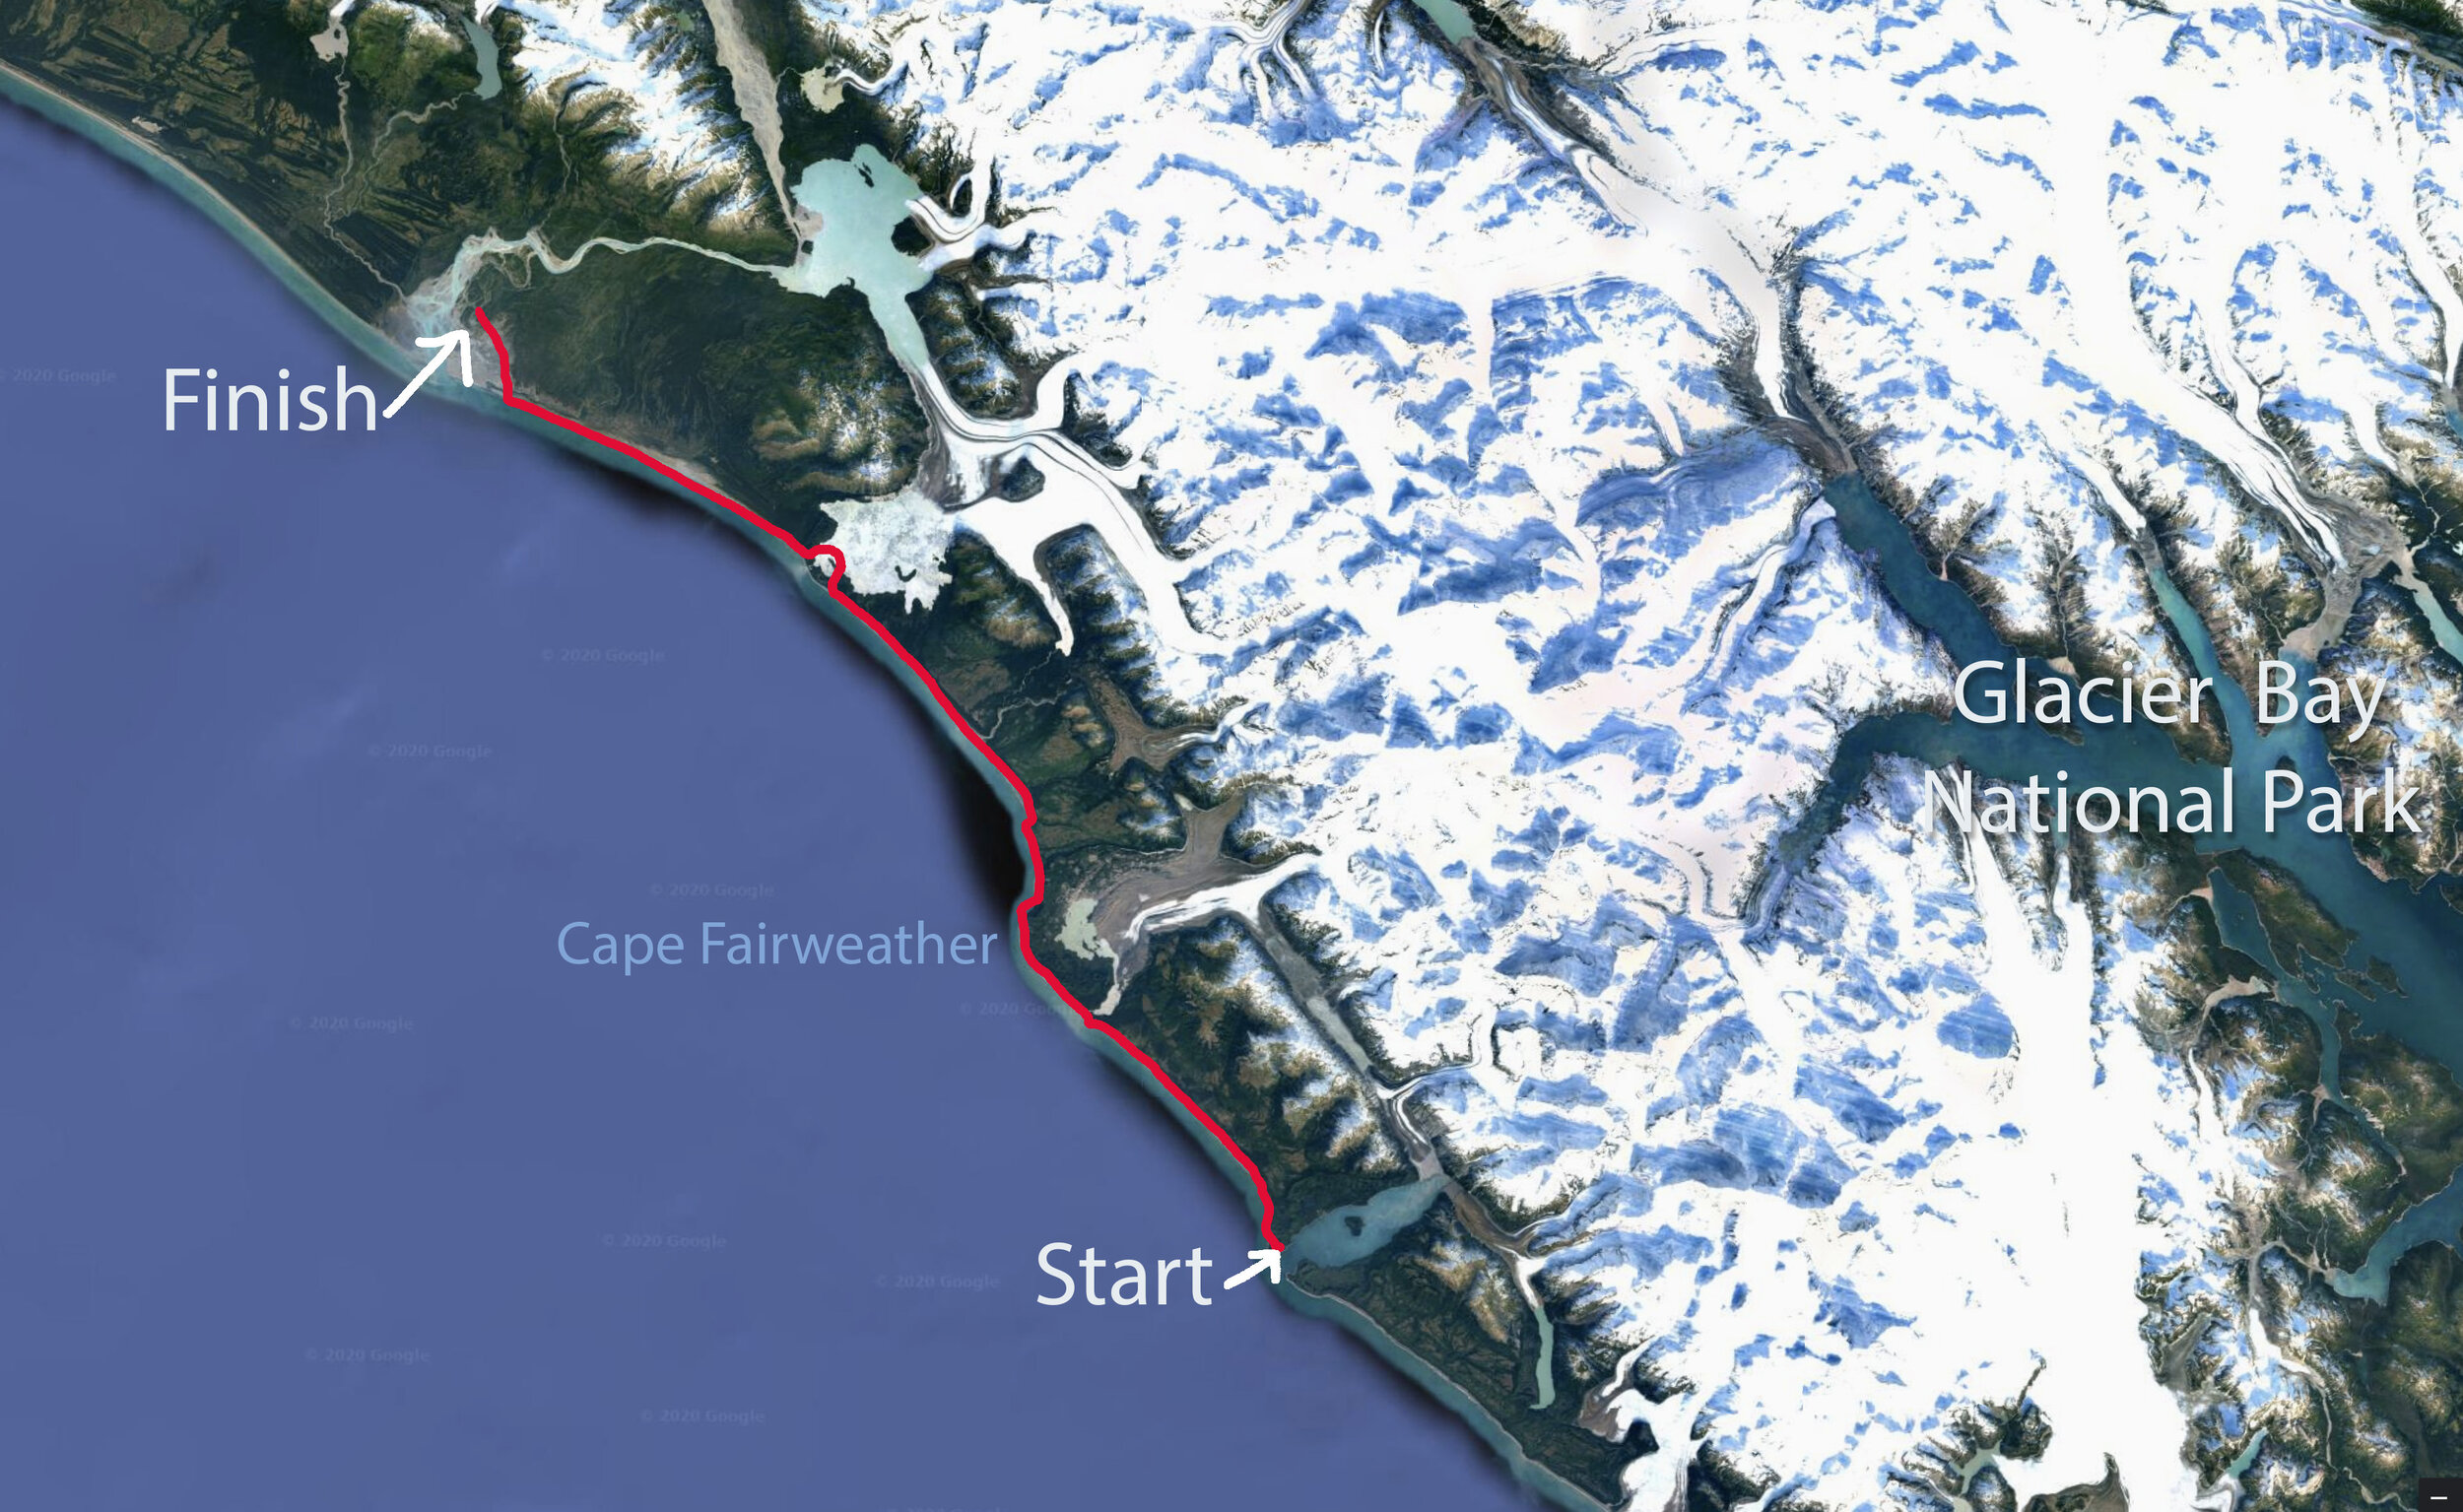  We started in Lituya Bay after being dropped off by bush planes. We hiked the coastline northwest for approximately 60 miles to reach a remote dirt airstrip at the mouth of the Alsek River. In this  Google Earth image you can see the massive Fairwea